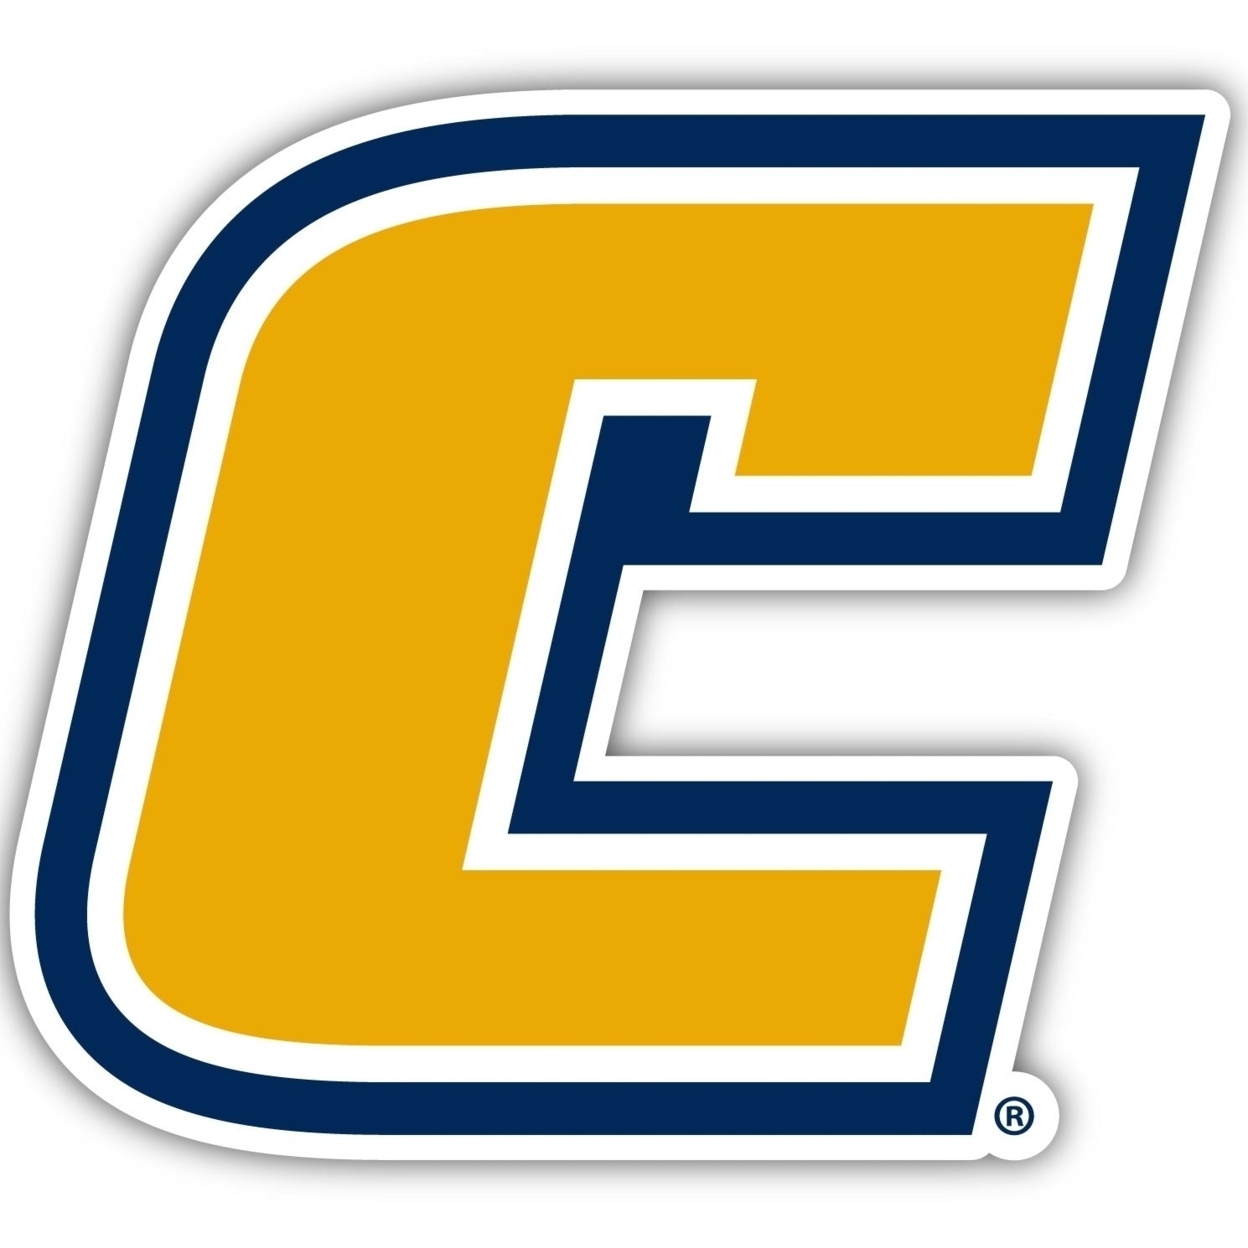 University Of Tennessee At Chattanooga 4 Inch Vinyl Decal Sticker